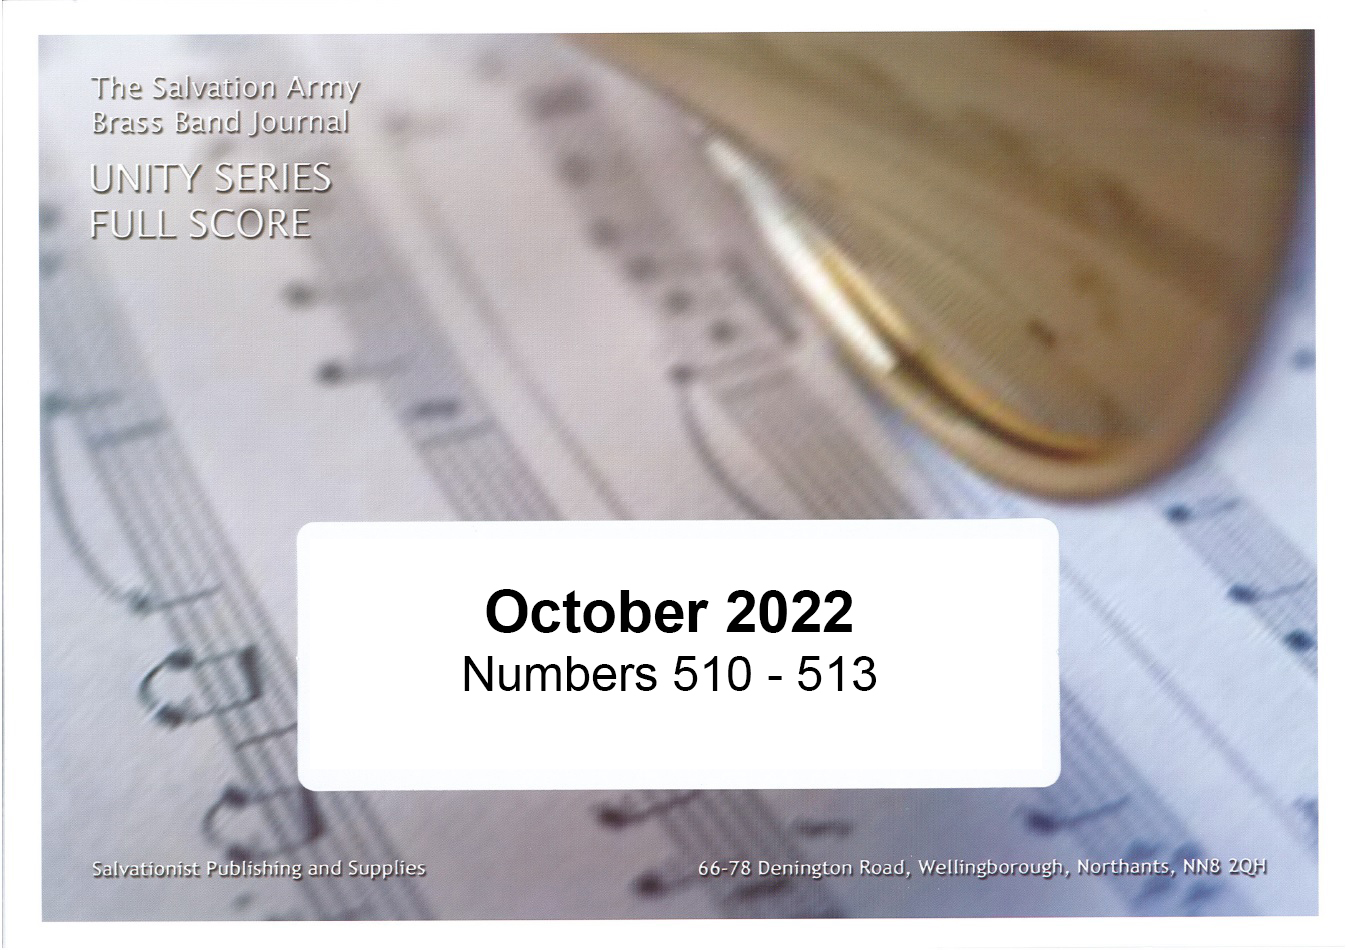 Unity Series Band Journal - Numbers 510 - 513, October 2022